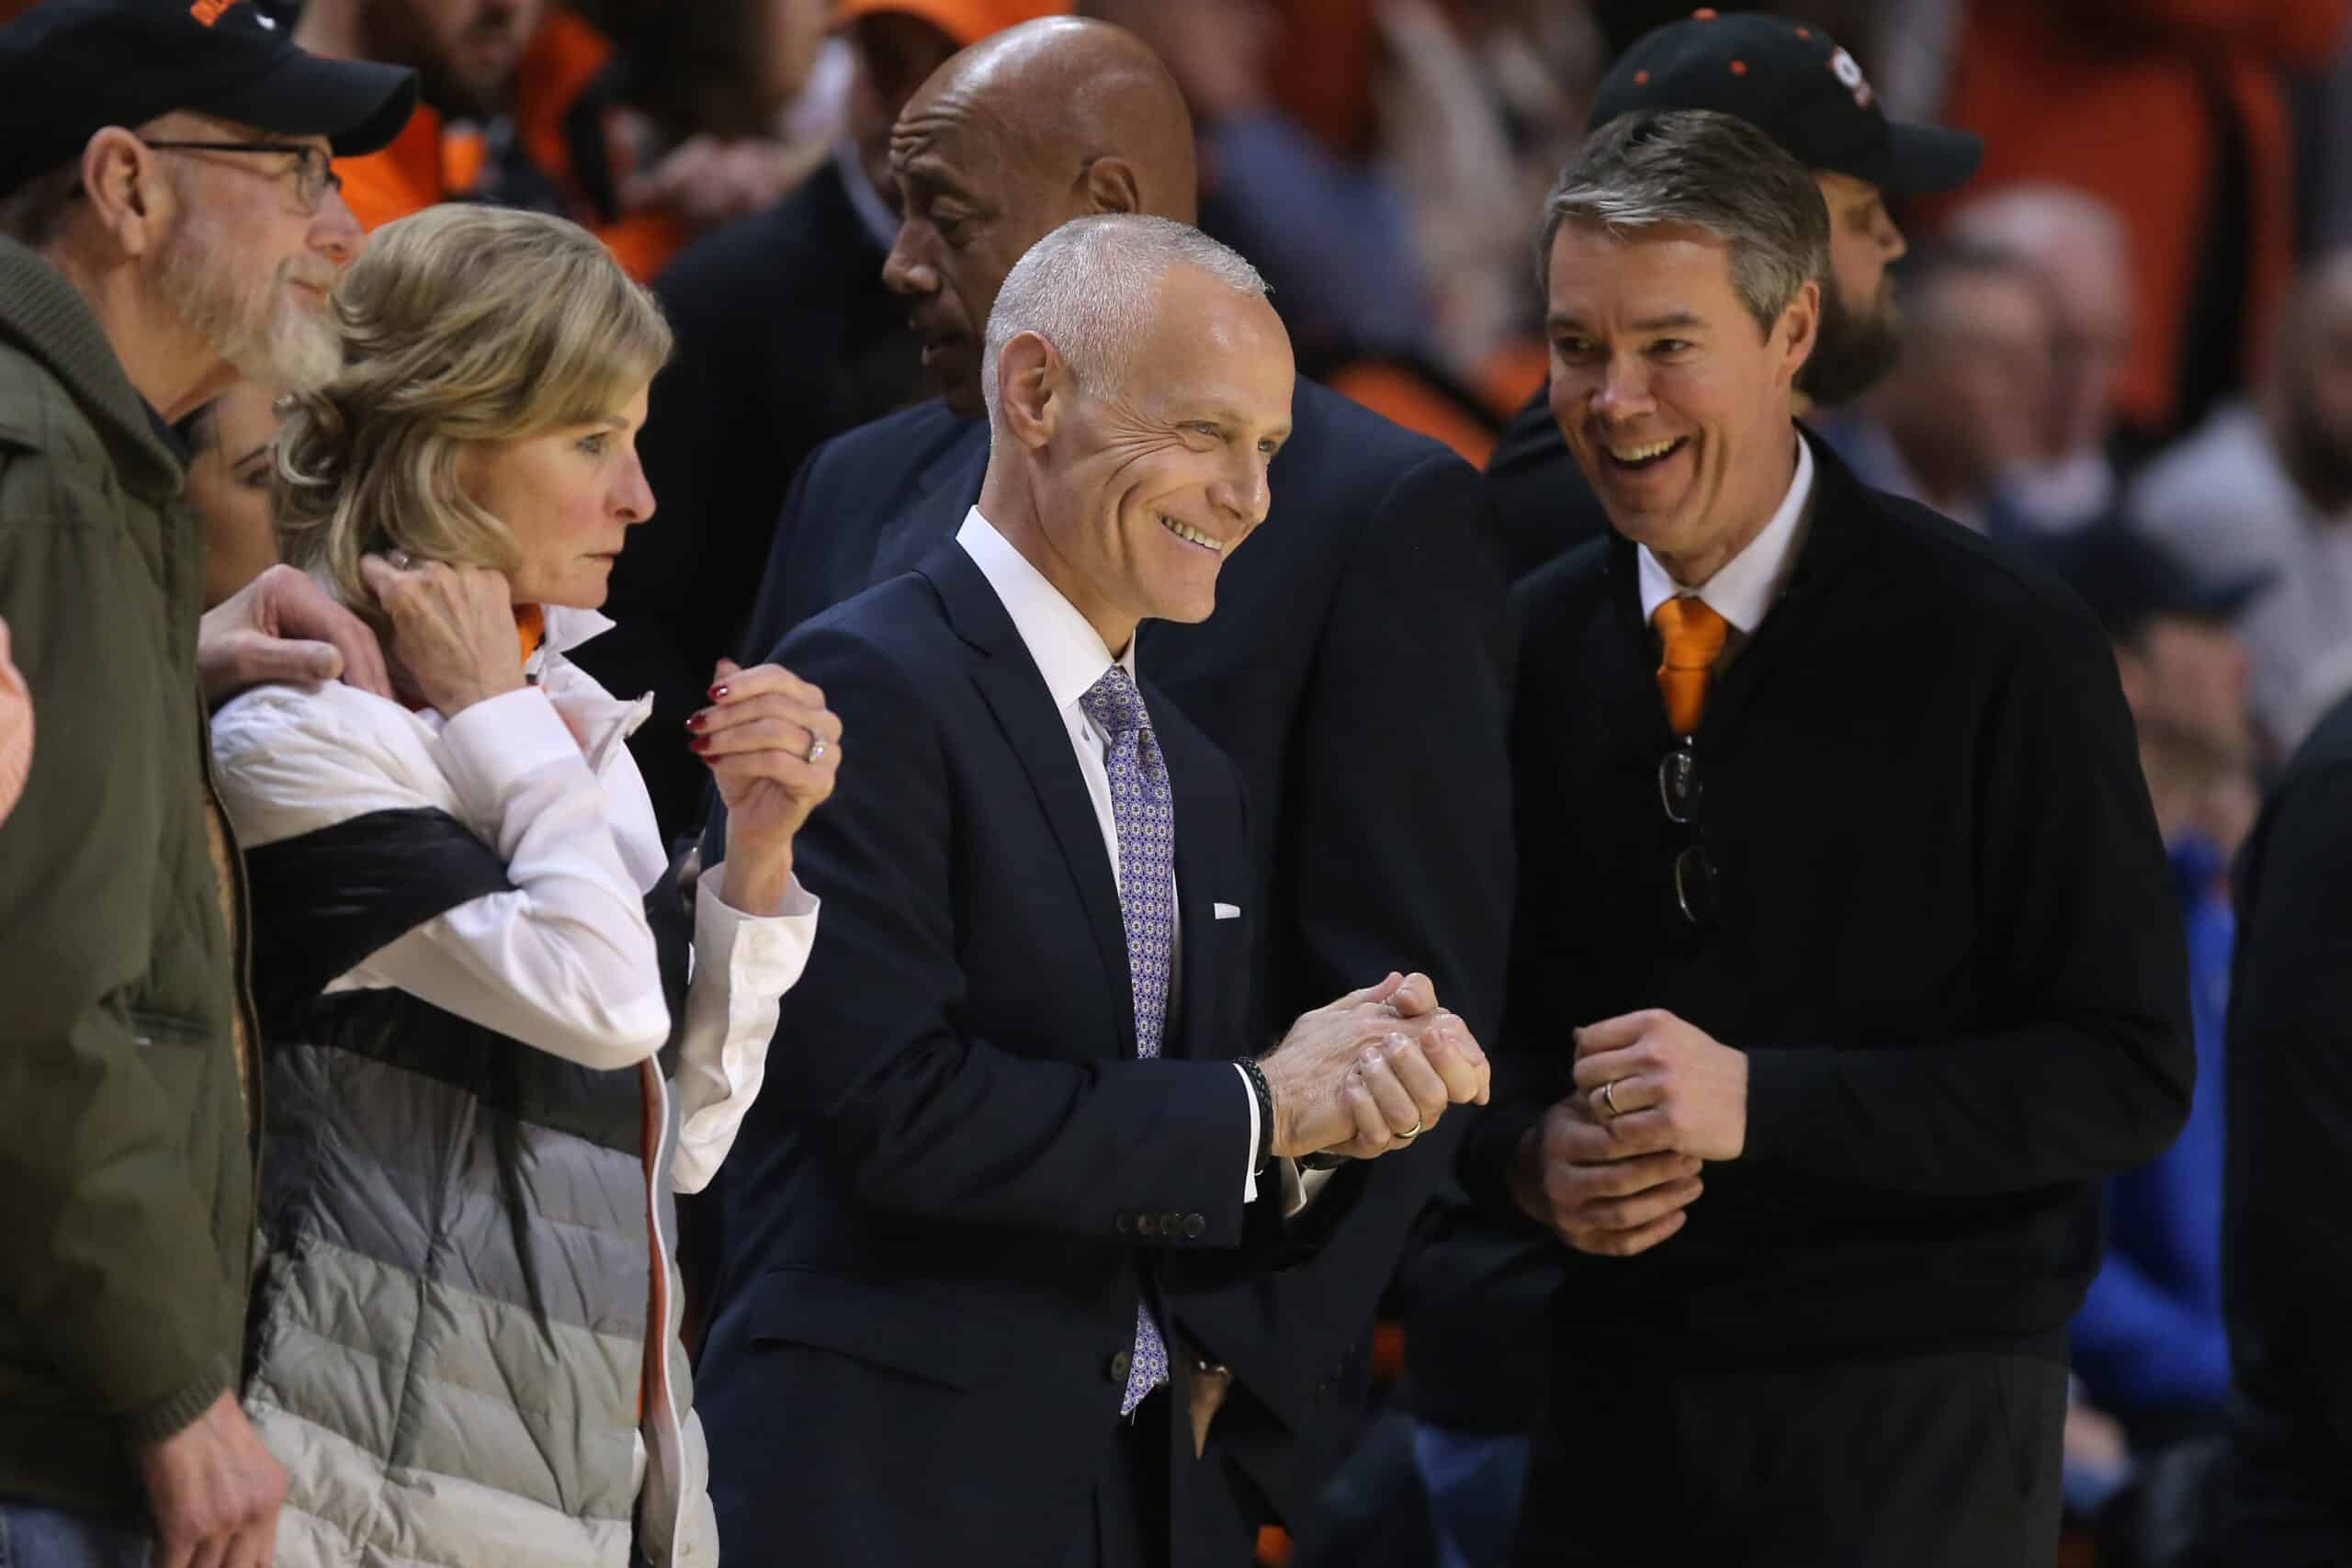 Big 12 commissioner Brett Yormark, center, and Oklahoma State athletic director Chad Weiberg, right, before a men's college basketball game between the Oklahoma State University Cowboys and the Kansas Jayhawks at Gallagher-Iba Arena in Stillwater, Okla., Tuesday, Feb. 14, 2023.